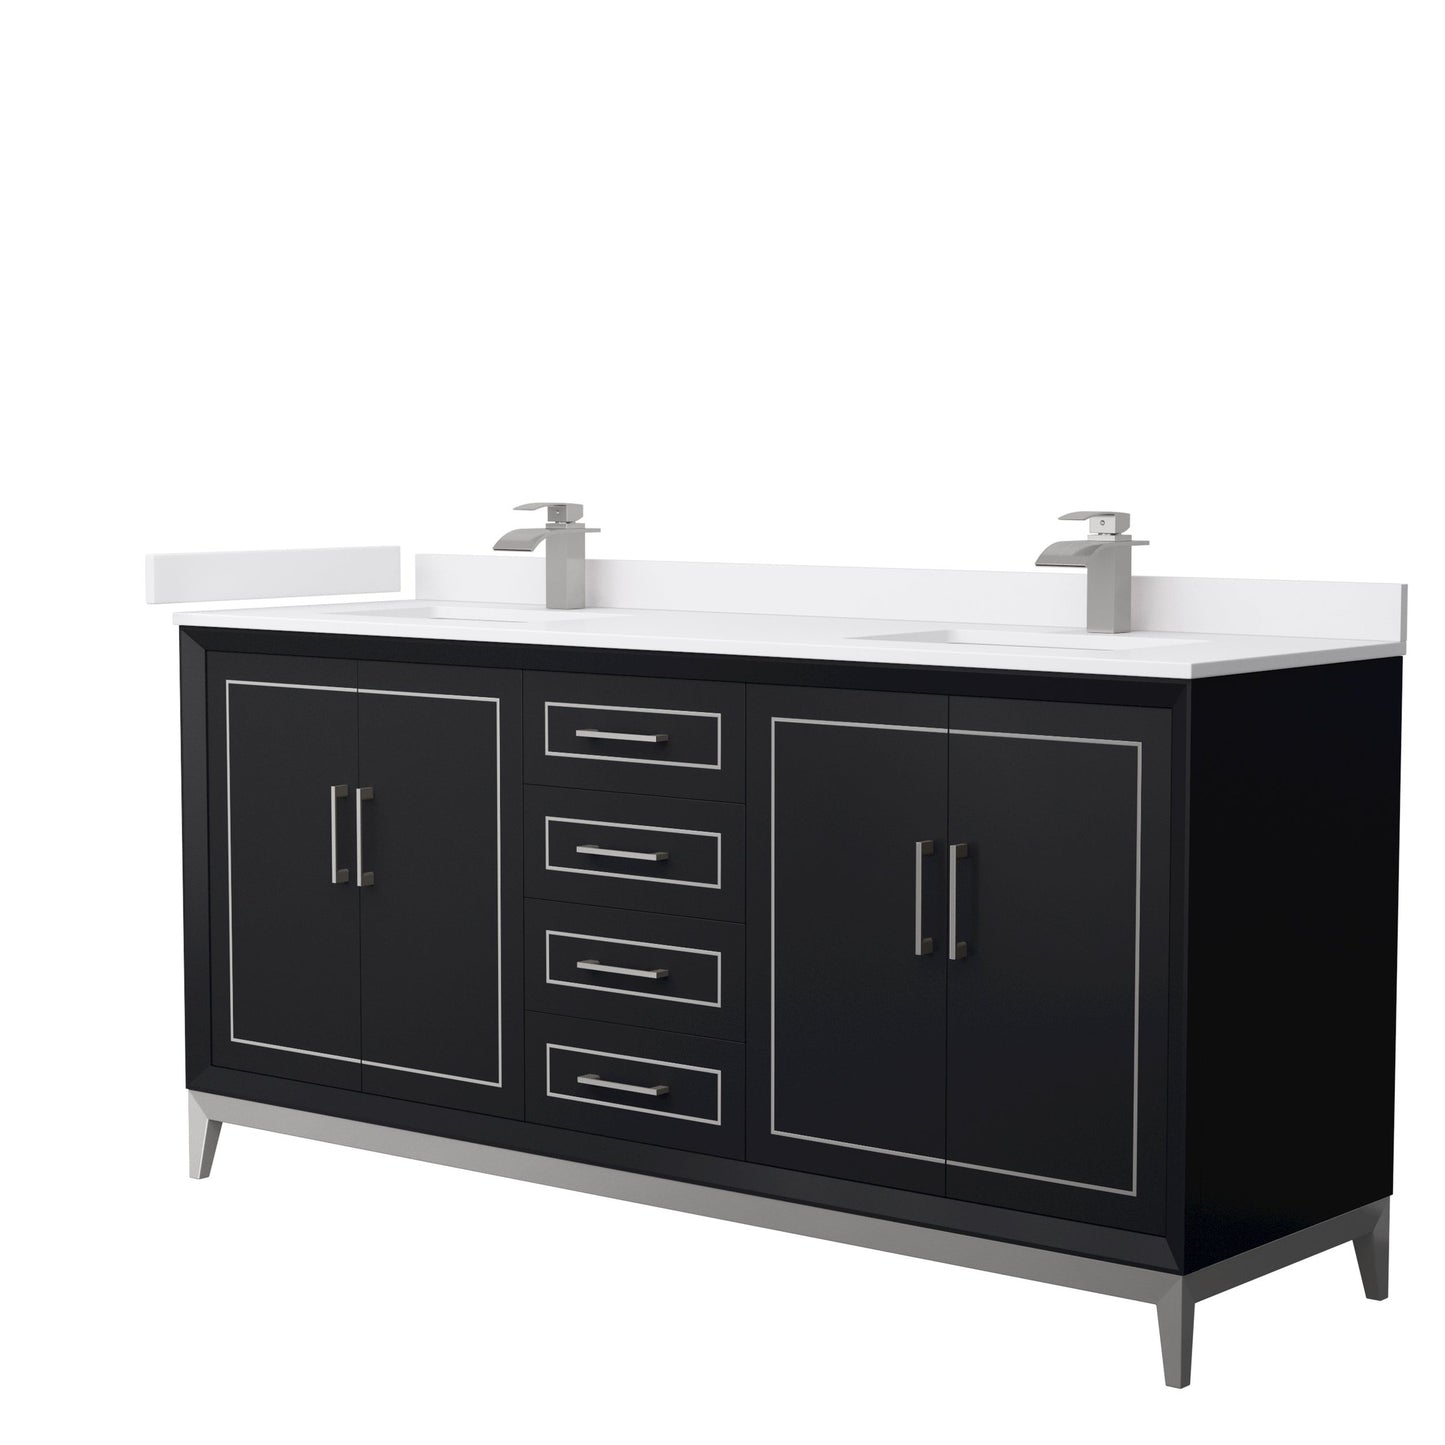 Wyndham Collection Marlena 72" Double Bathroom Vanity in Black, White Cultured Marble Countertop, Undermount Square Sinks, Brushed Nickel Trim